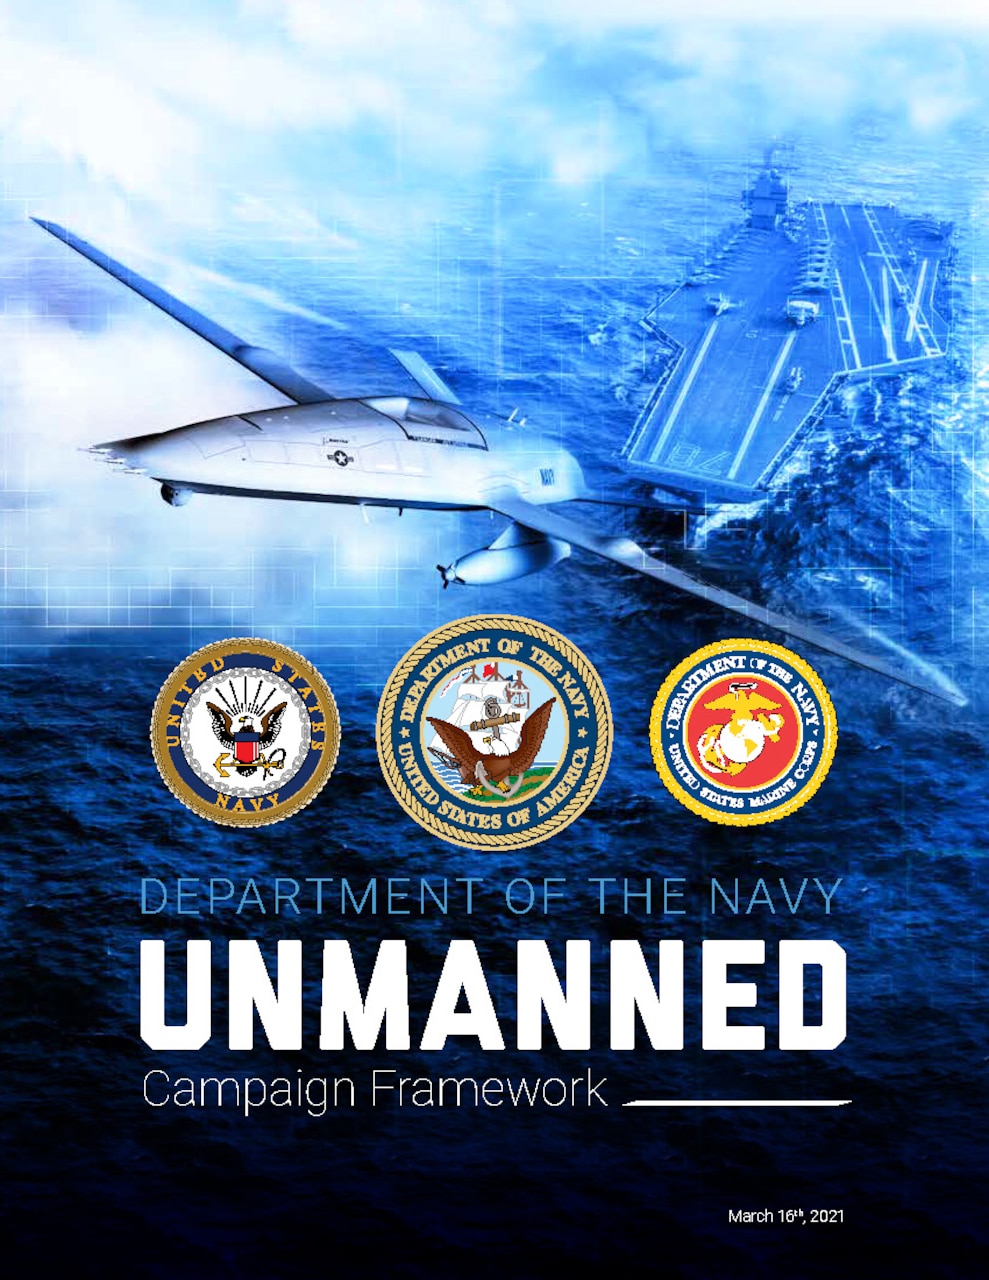 The Unmanned Campaign Plan represents the Navy and Marine Corps' strategy for making unmanned systems a trusted and integral part of warfighting.